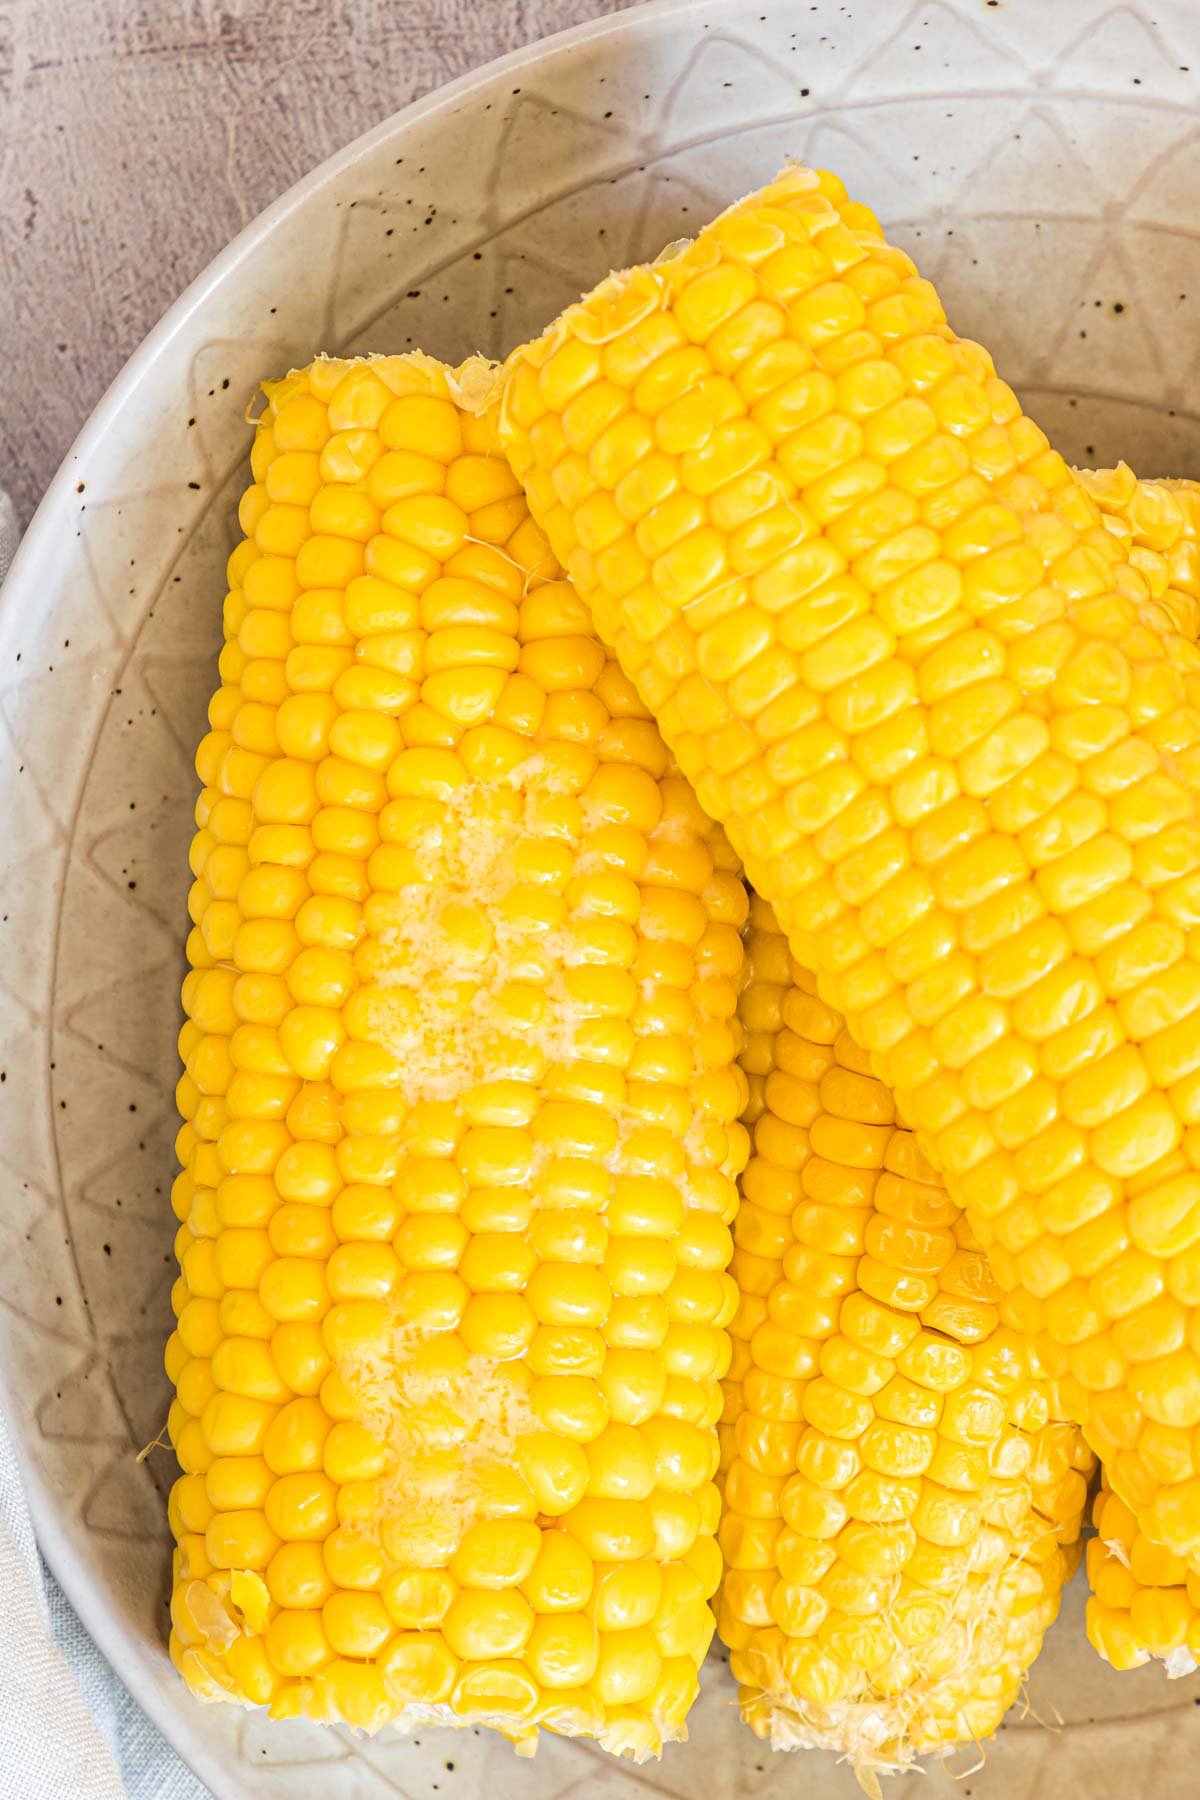 finished microwaved corn on the cob on a plate